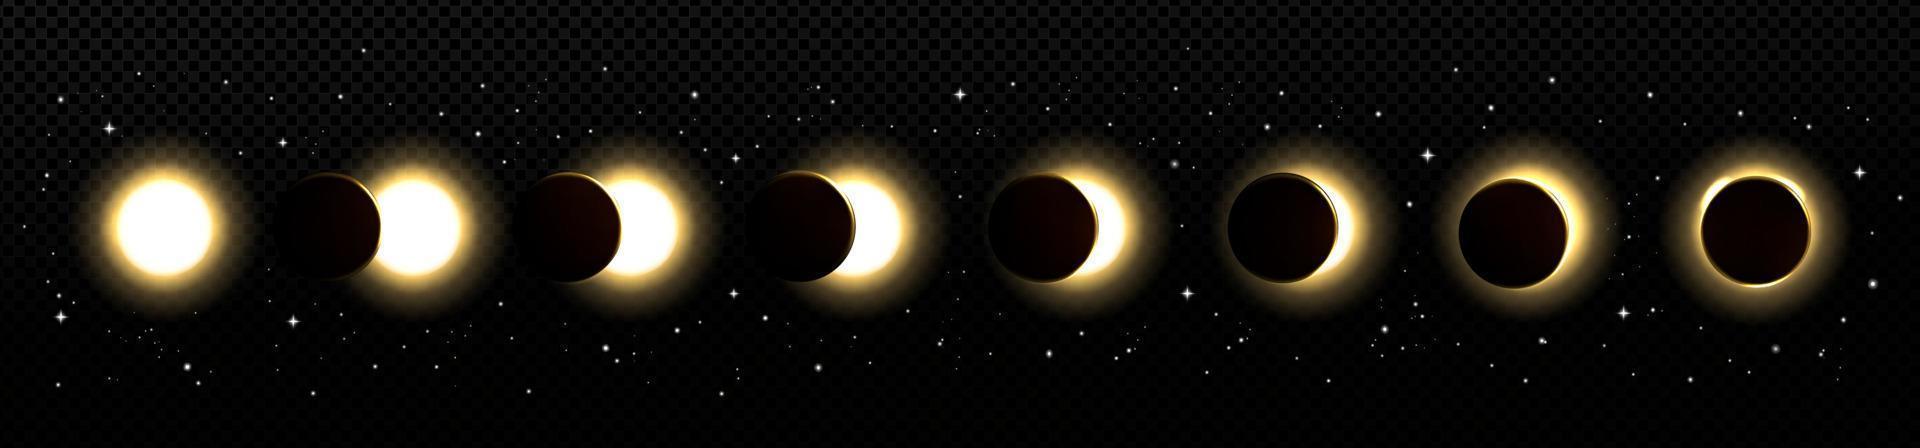 Solar eclipse in different phases vector